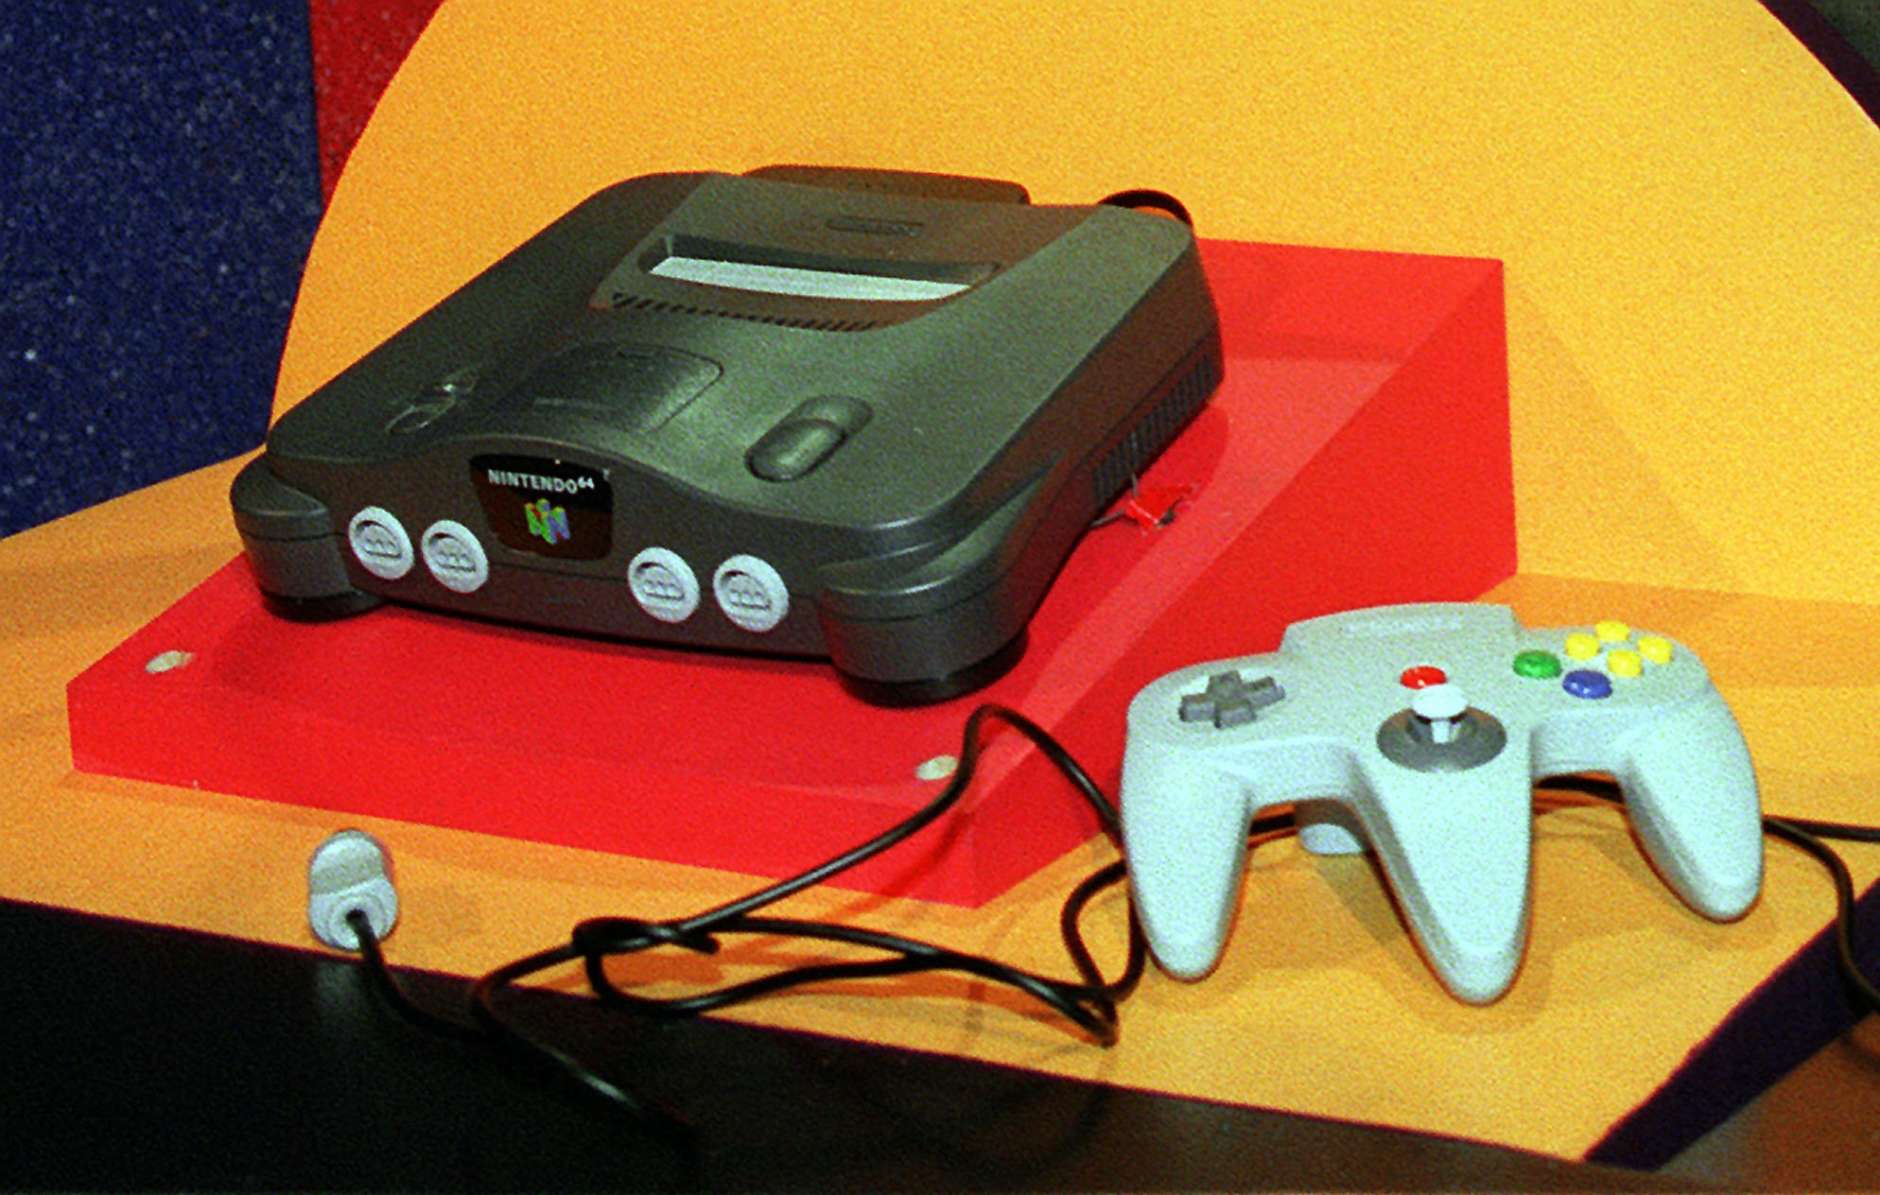 The newly unveiled Nintendo 64 video, the world's first true 64-bit home video game, is displayed during a news conference  Wednesday, May 15, 1996, in Los Angeles. The introduction of the Nintendo system will be a big event as developers and marketers gather in Los Angeles for the Electronic Entertainment Expo. Nintendo 64 will be available for a manufacturer's suggested retail price of $249.95. (AP Photo/Kevork Djansezian)